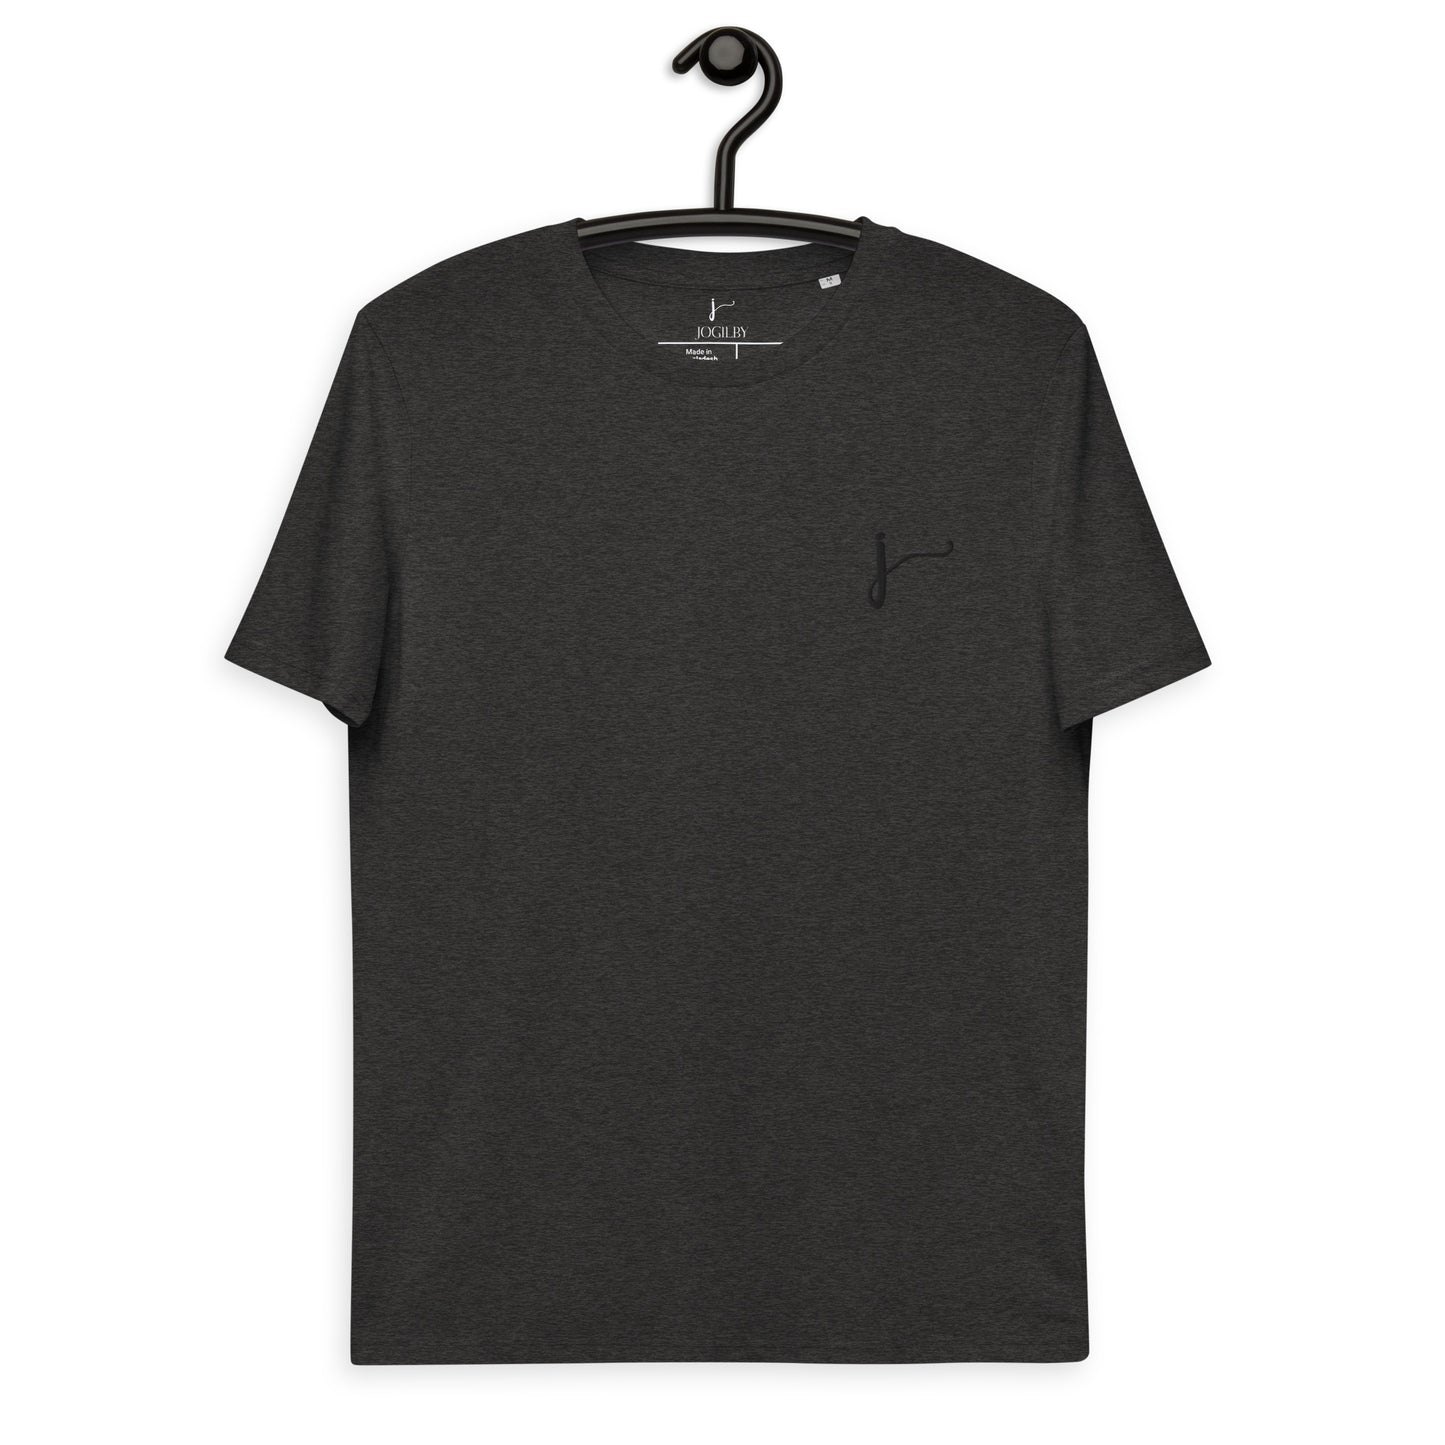 Jogilby Understated Embroidered T-Shirt